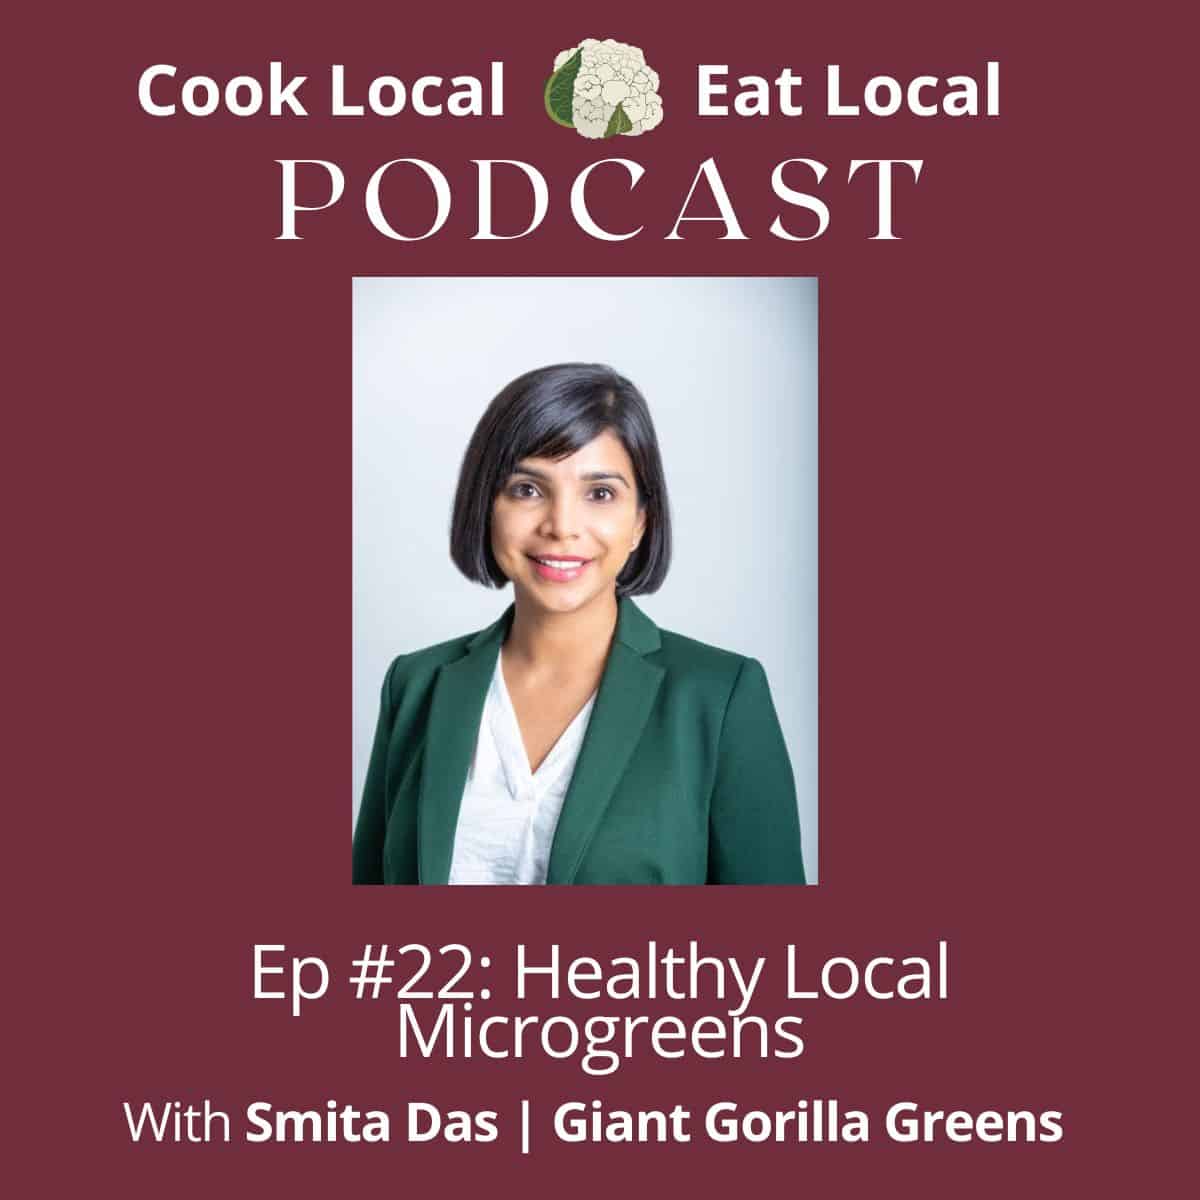 Cook Local Eat Local podcast cover with a photo of guest Smita Das with text that says "episode 22 Healthy Local Microgreens".